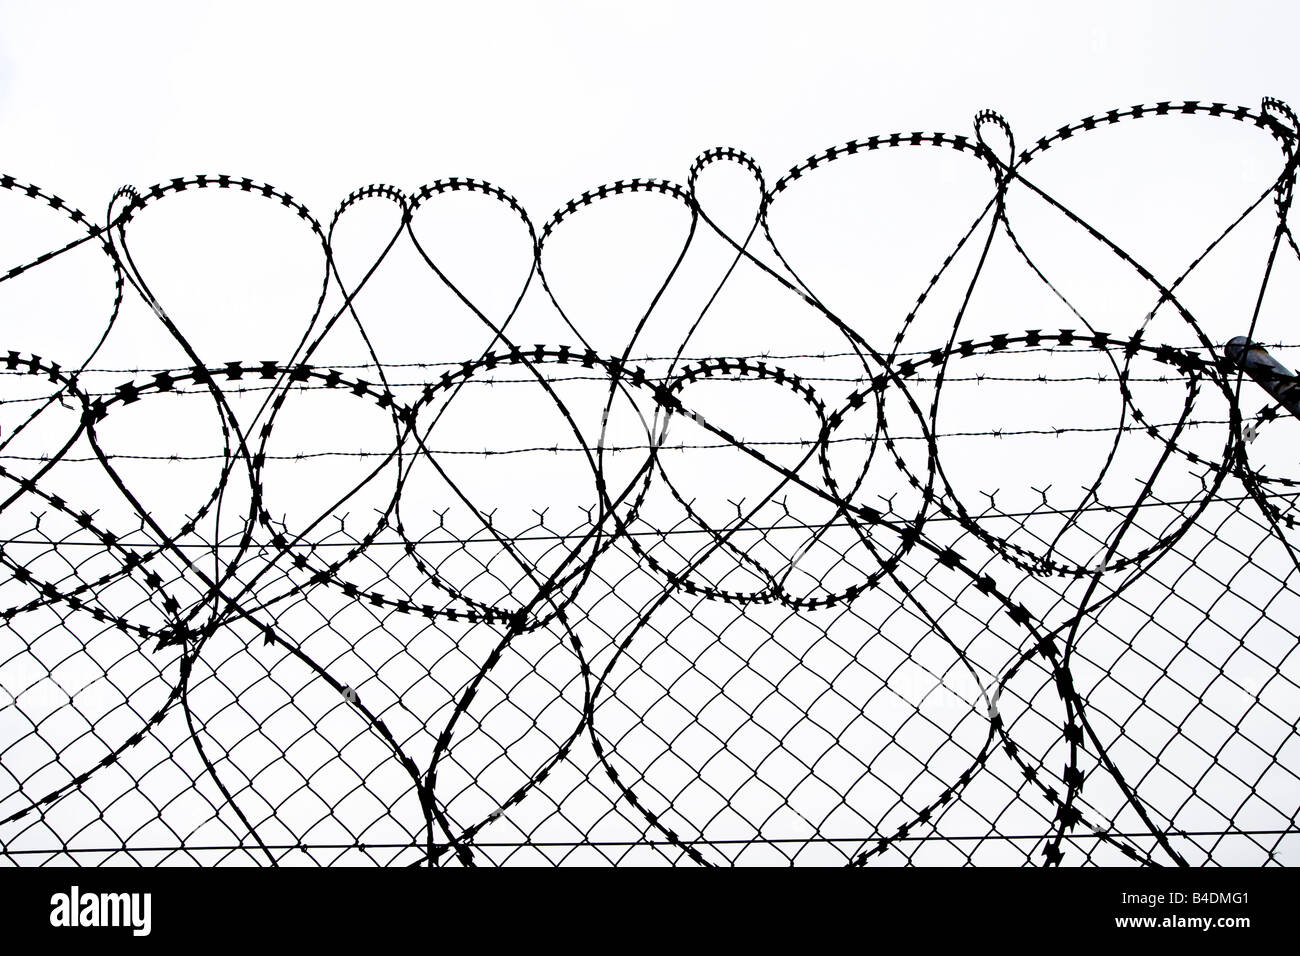 Razor wire and fence silhouette UK Stock Photo